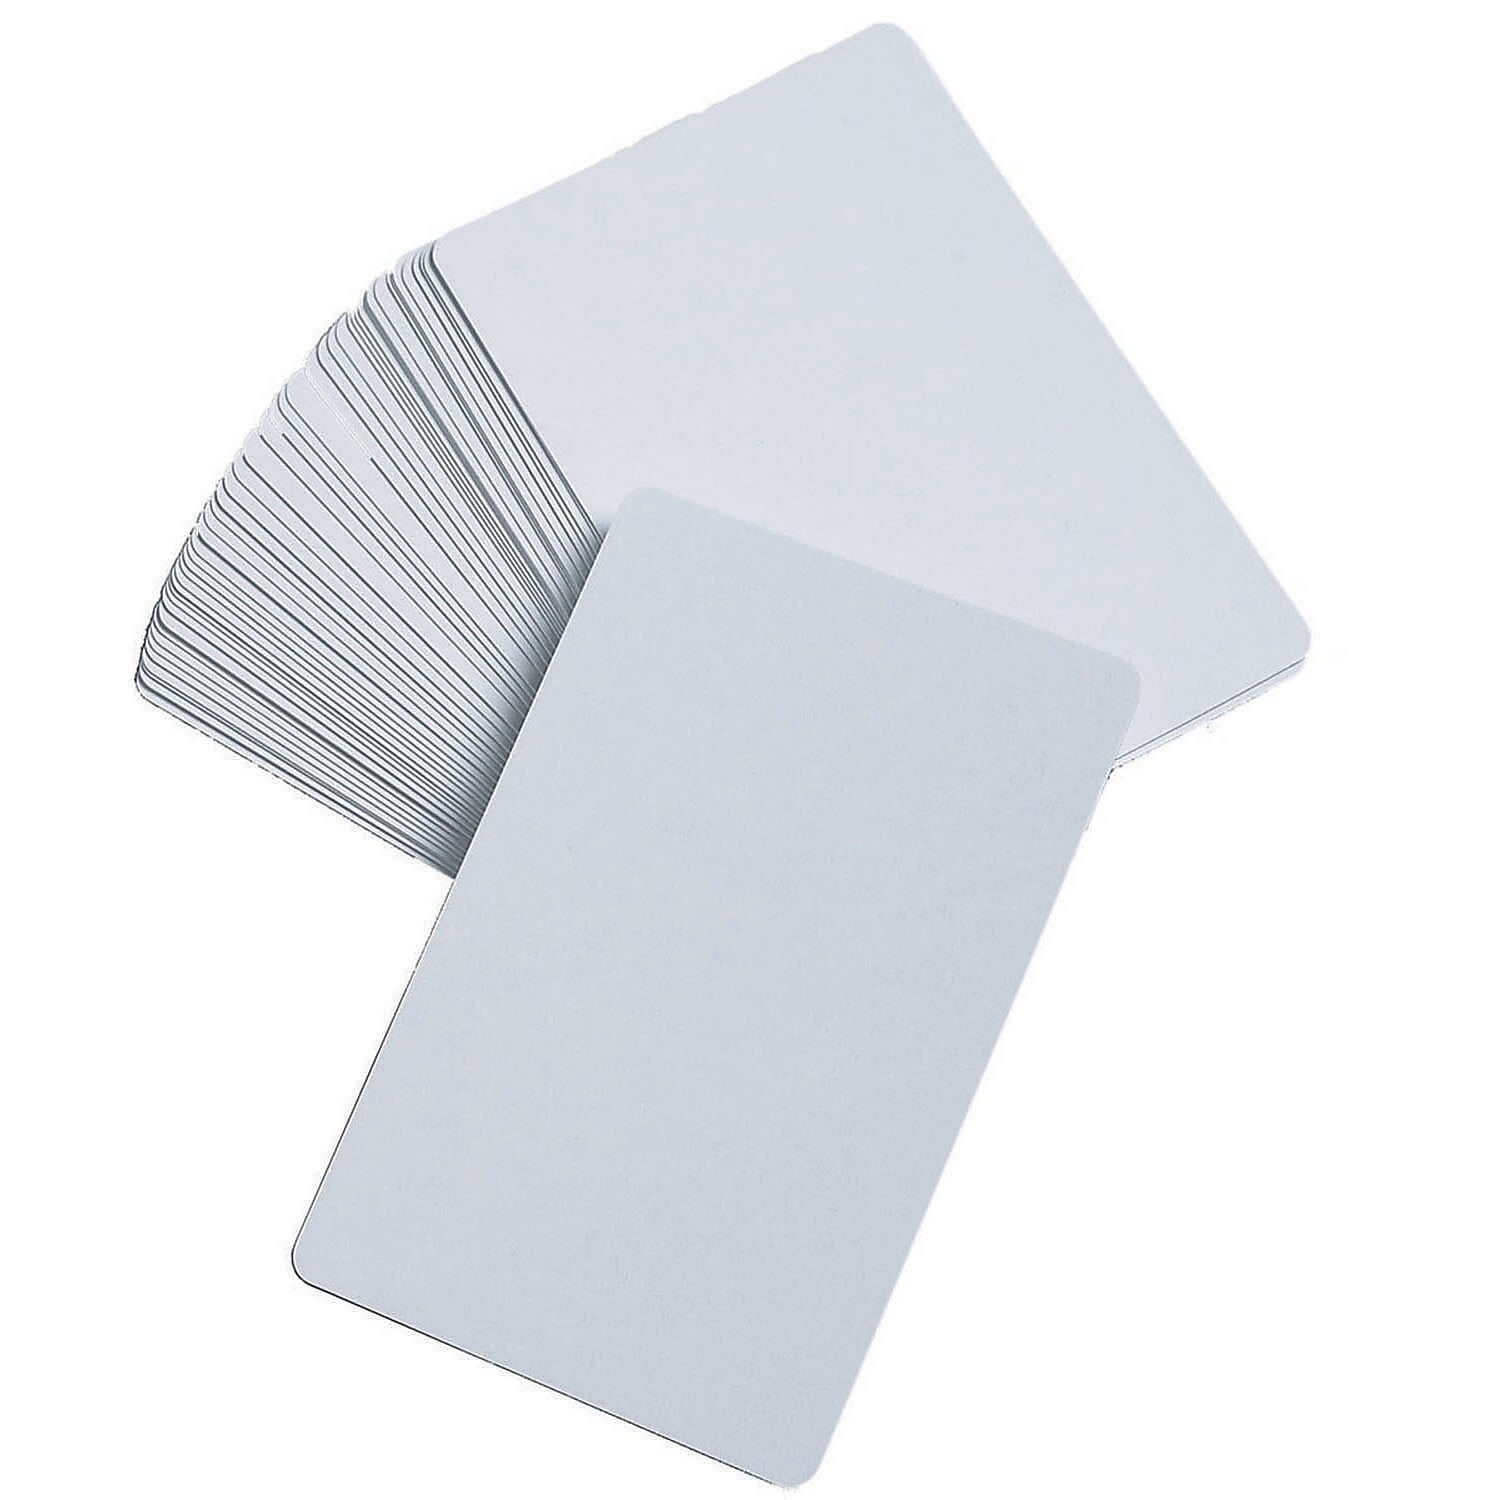 LEARNING ADVANTAGE - CTU7387 Blank Playing Cards, Glossy - DIY Game Cards,  Memory Game, Flash Cards by Learning Advantage Multi 